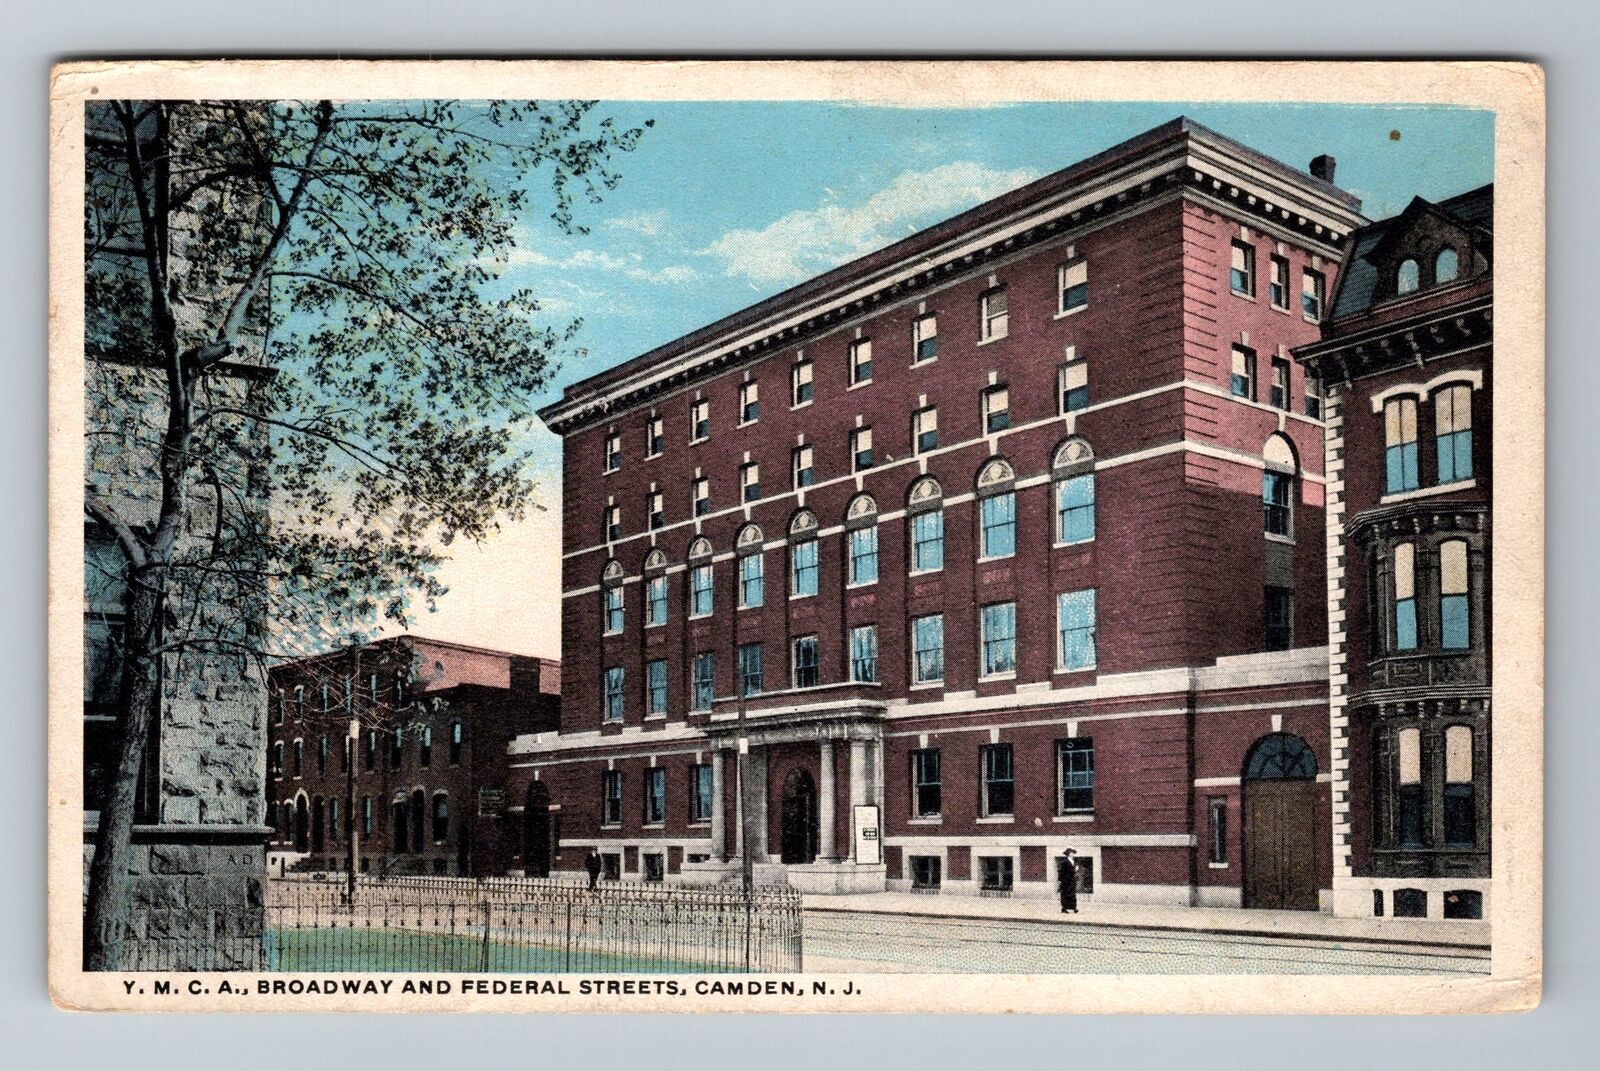 Camden NJ-New Jersey, YMCA Broadway And Federal Streets, Vintage Postcard